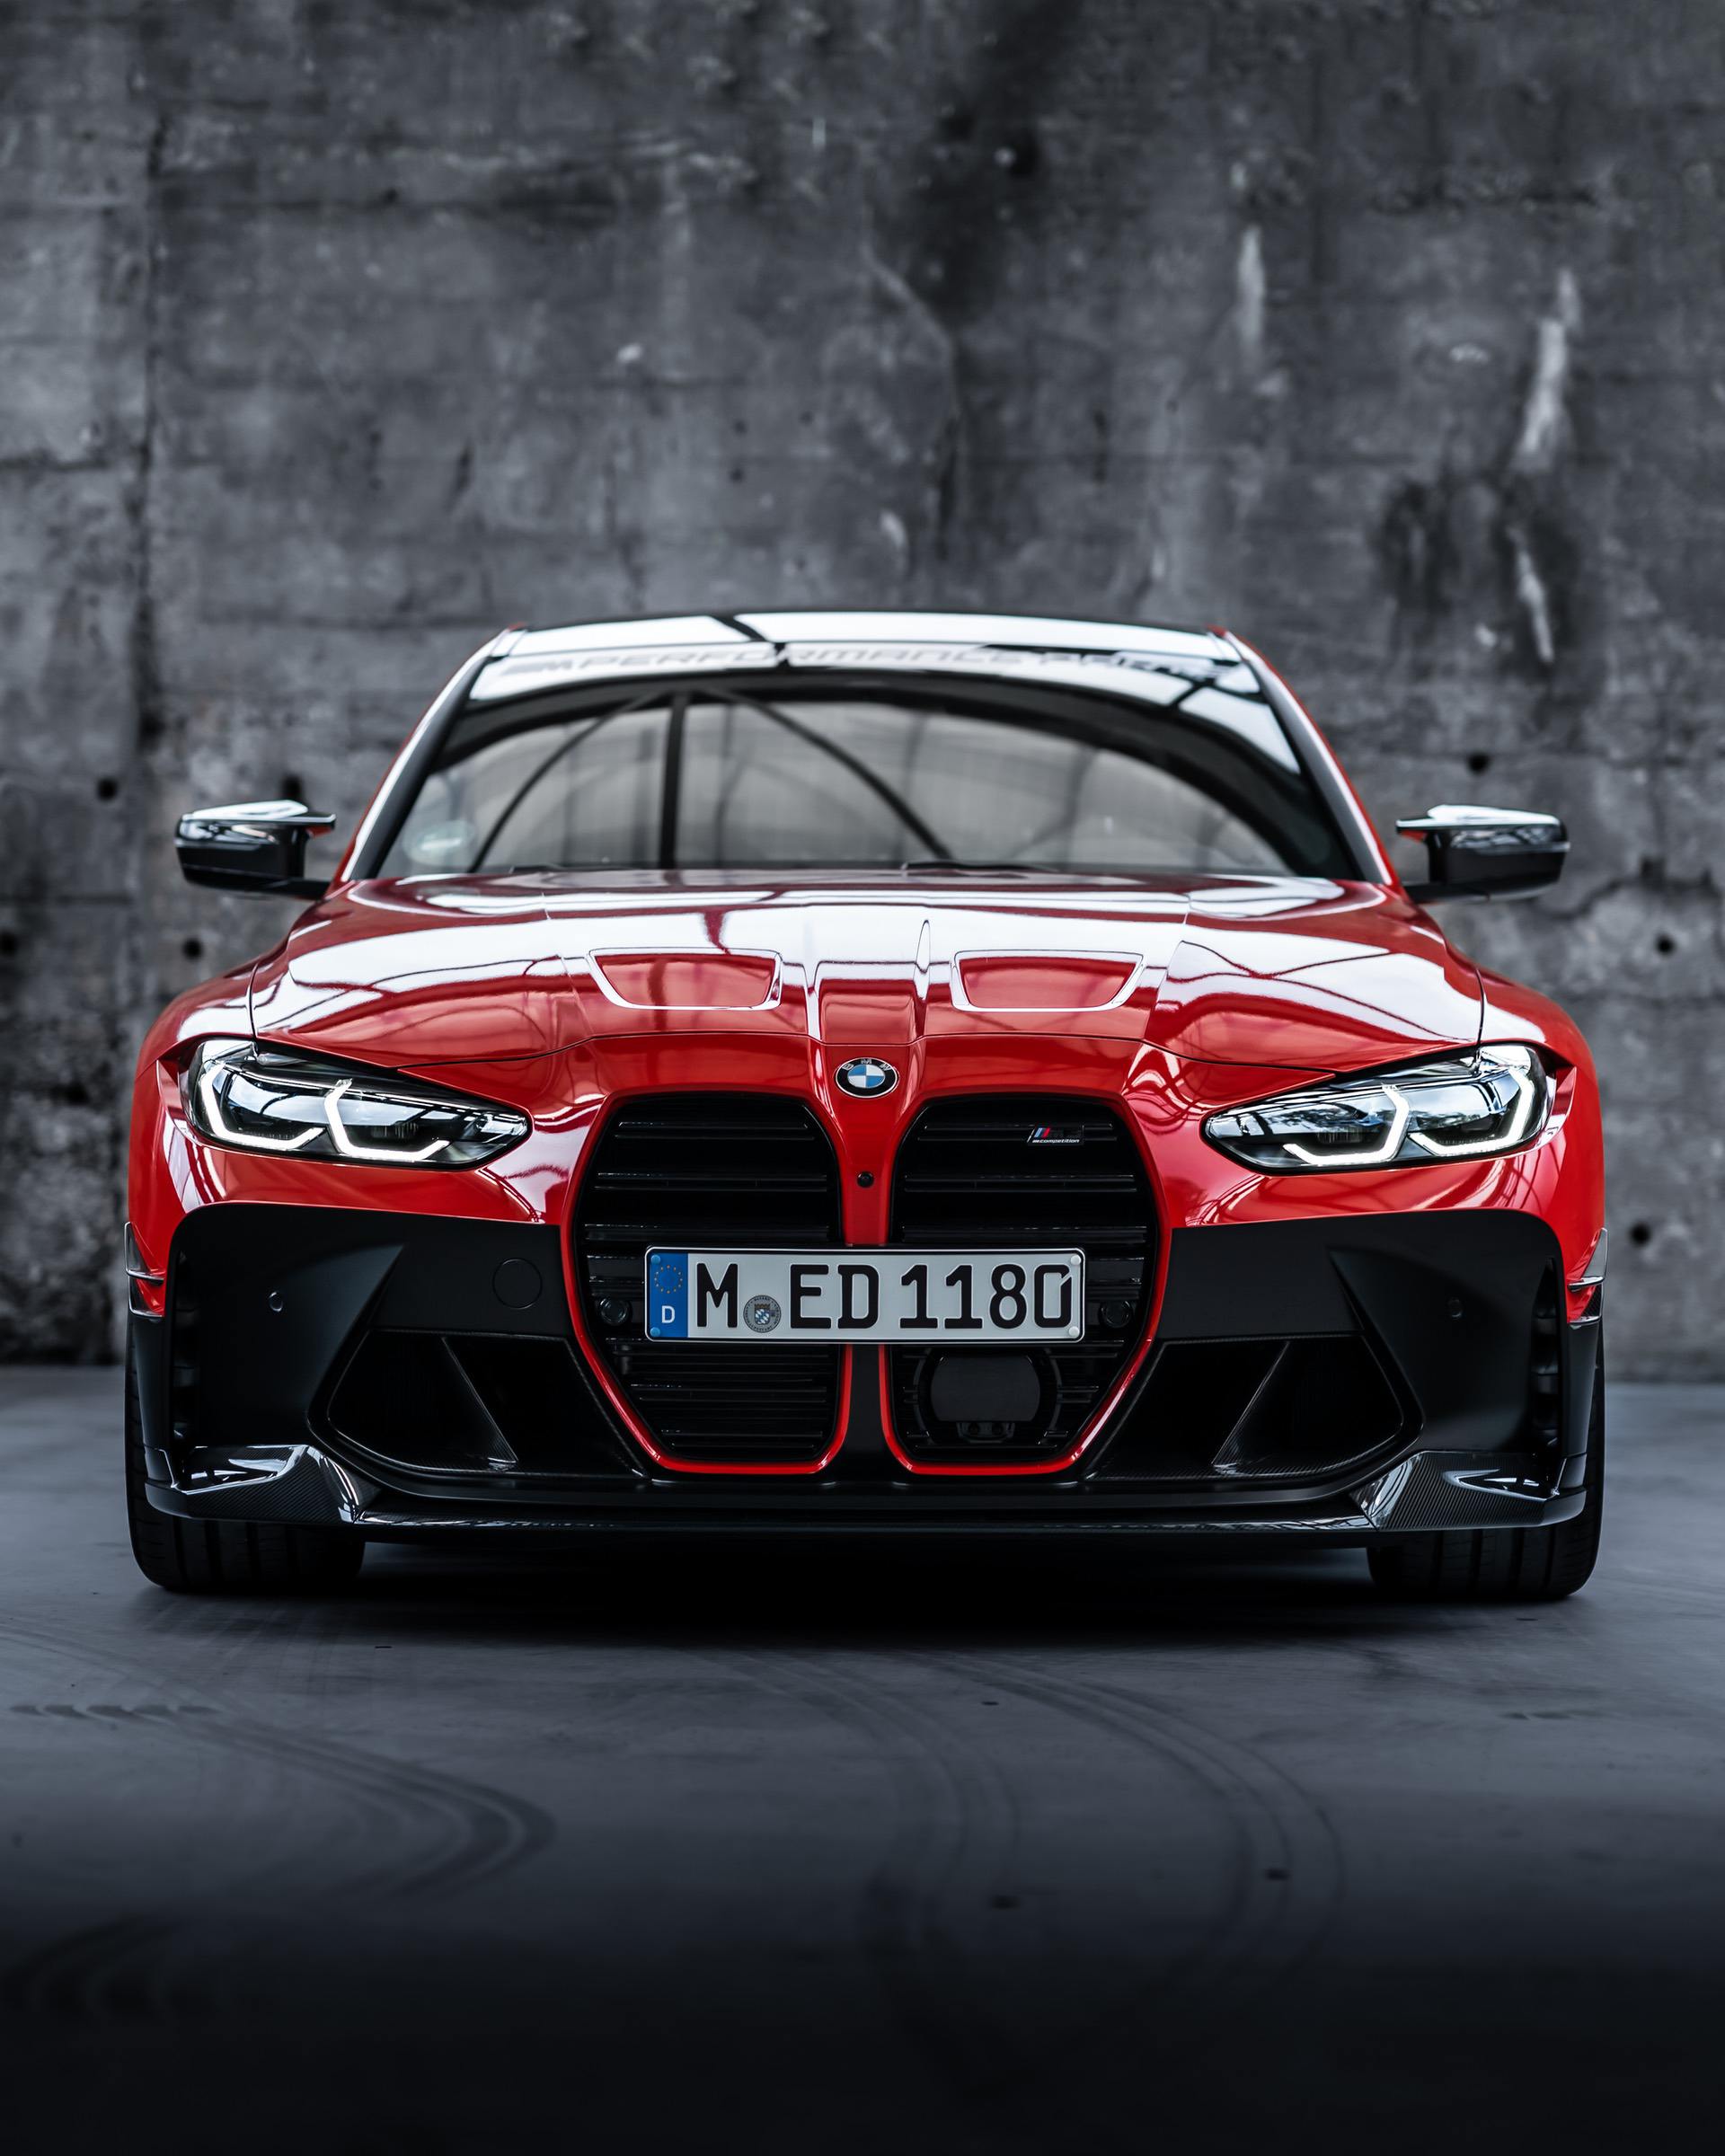 BMW M3 with M Performance Parts: A New Photo Gallery